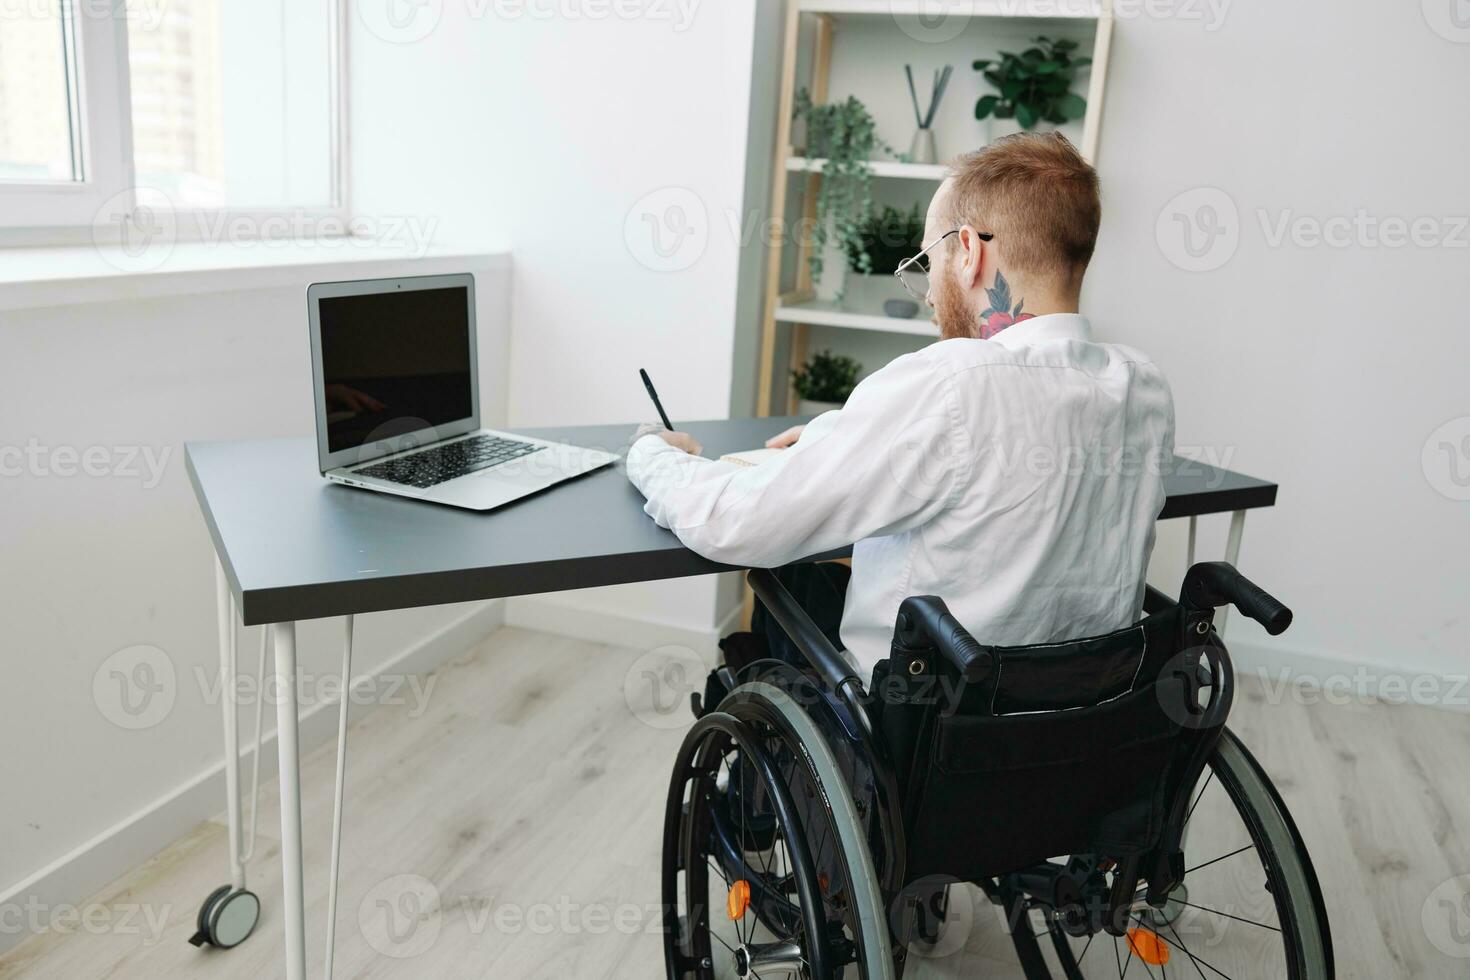 man wheelchair businessman with tattoos in the office works at a laptop online, business process from the back, copy space, integration into society, the concept of working a person with disabilities photo